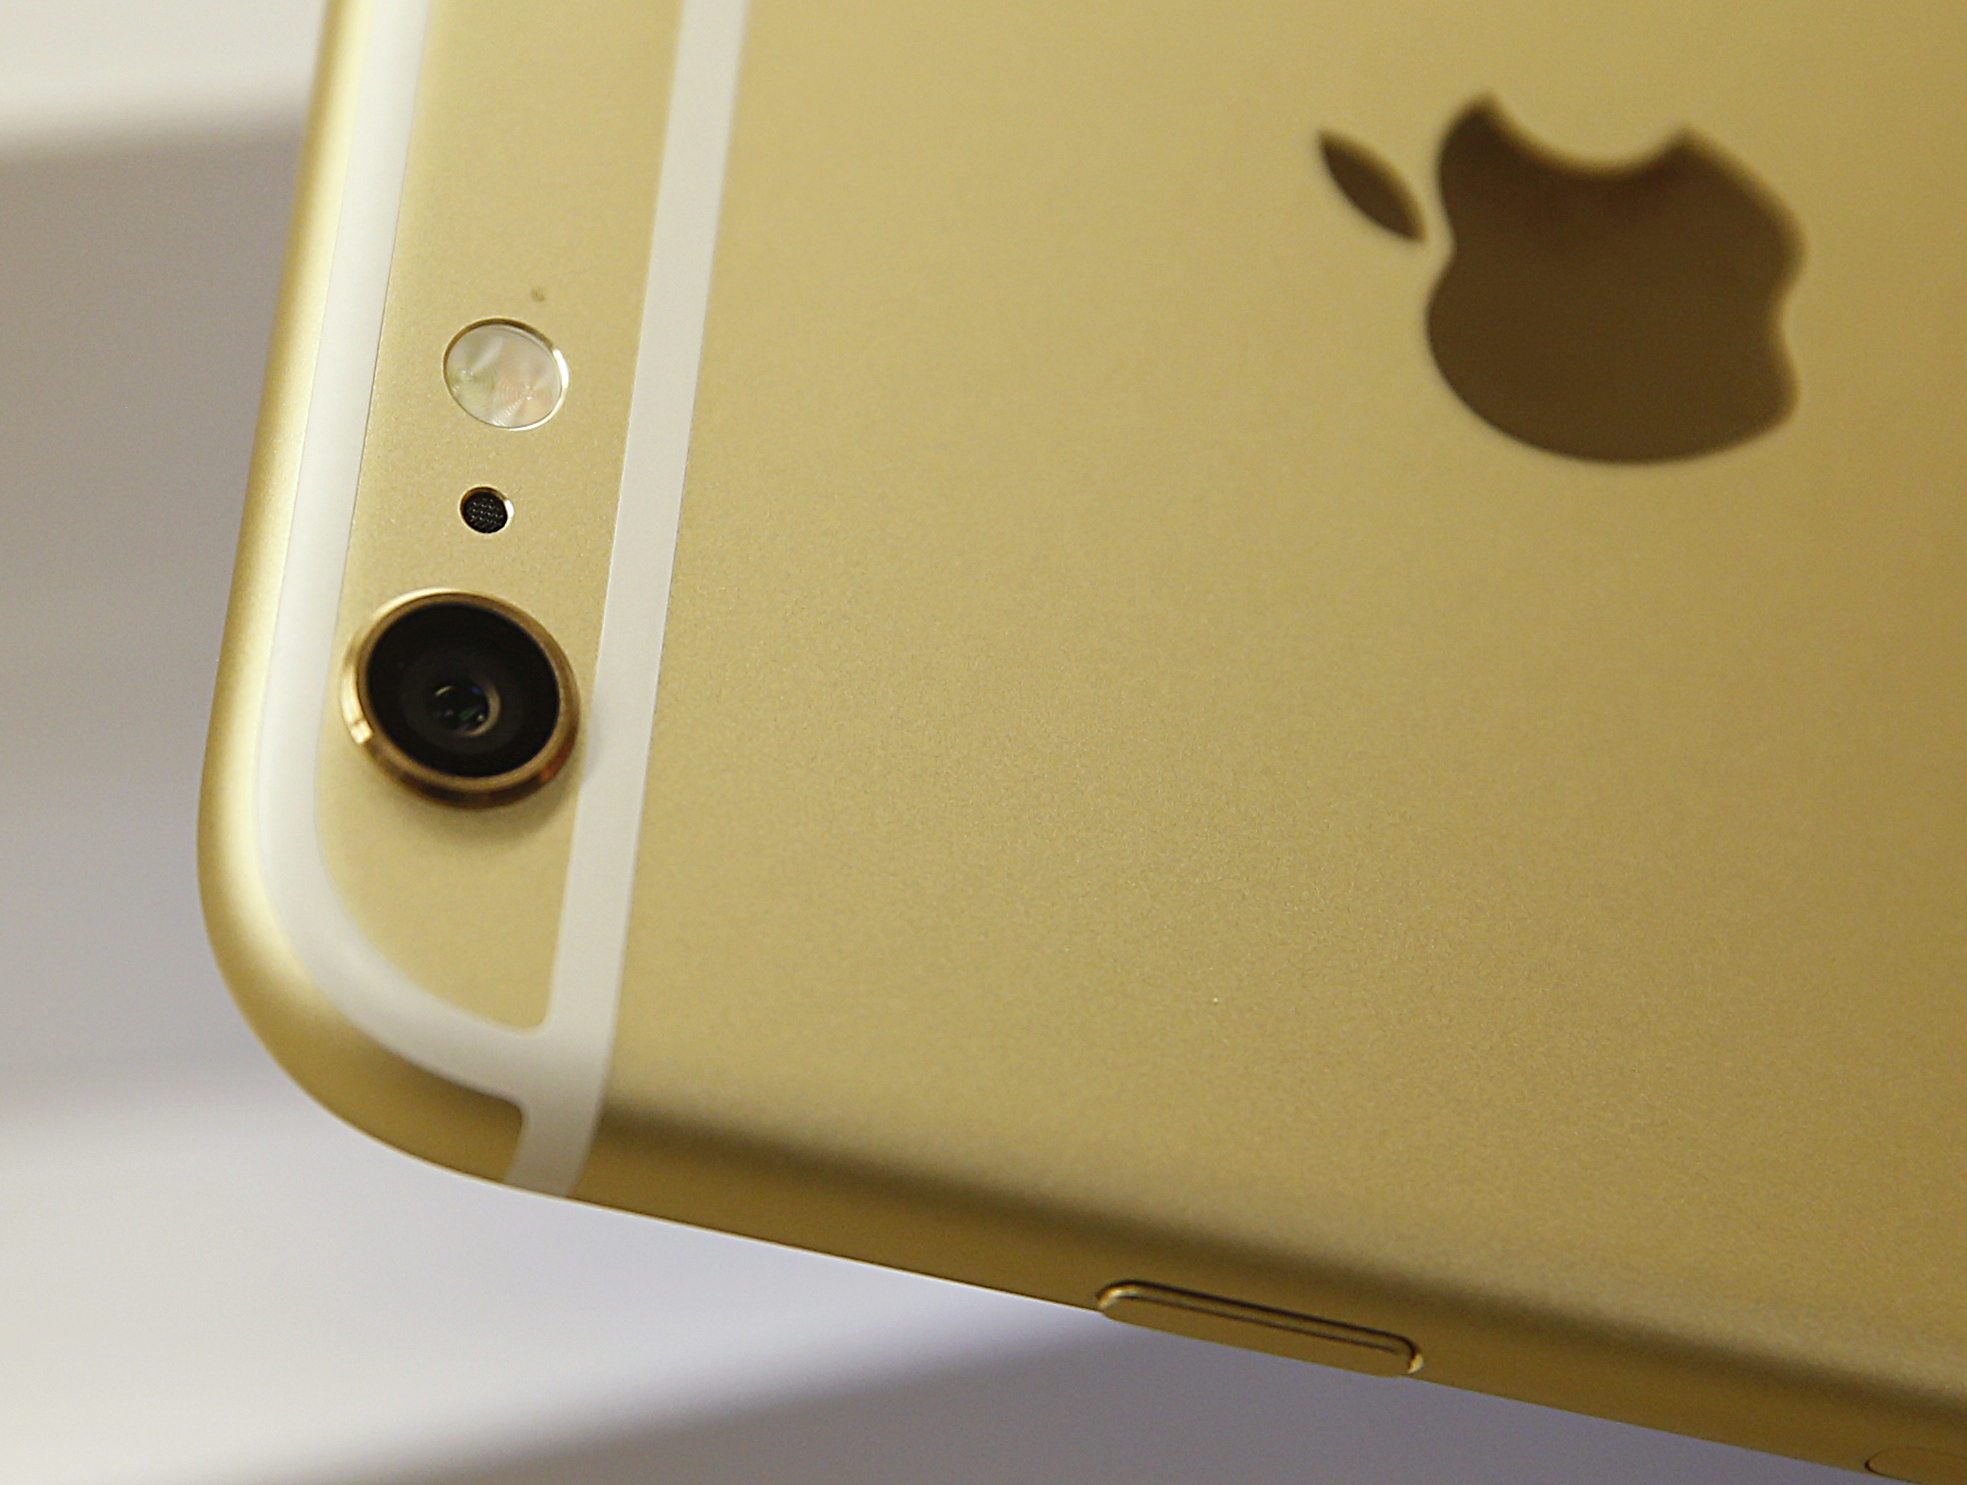 The camera and flash of an Apple iPhone 6 Plus gold, is shown here at a Verizon store on September 18, 2014 in Orem, Utah. (George Frey&mdash;Getty Images)